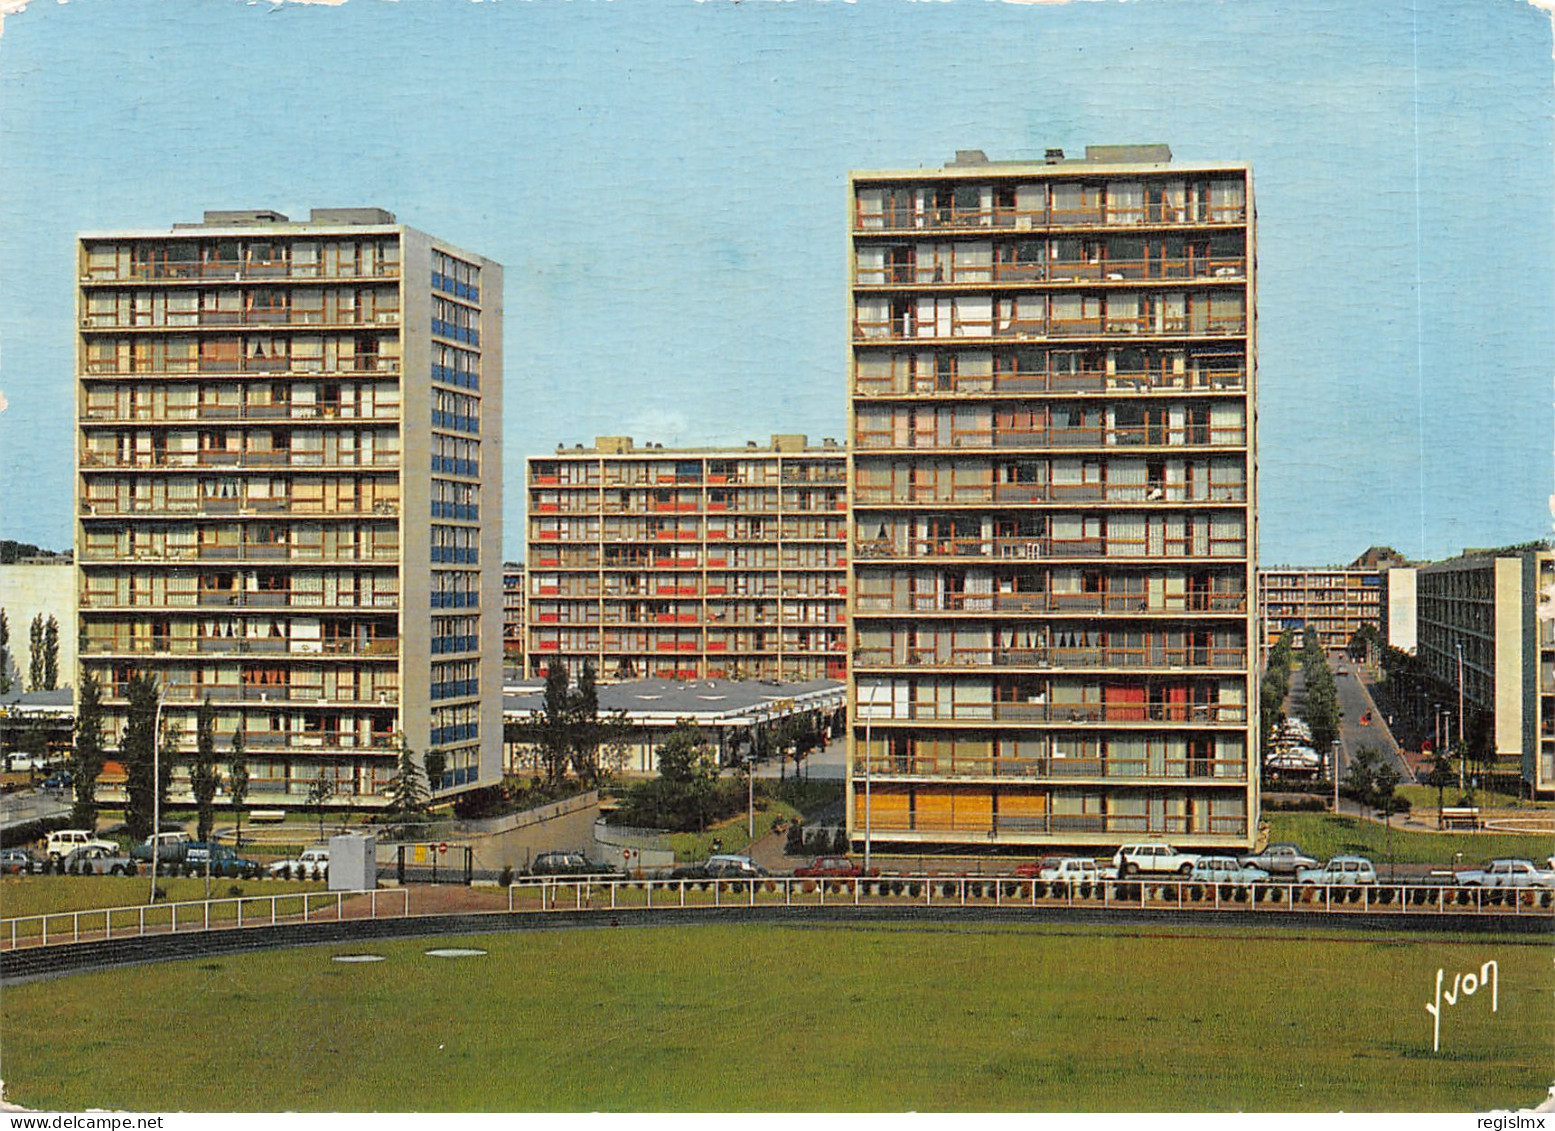 78-VELIZY VILLACOUBLAY-N°T574-A/0059 - Velizy